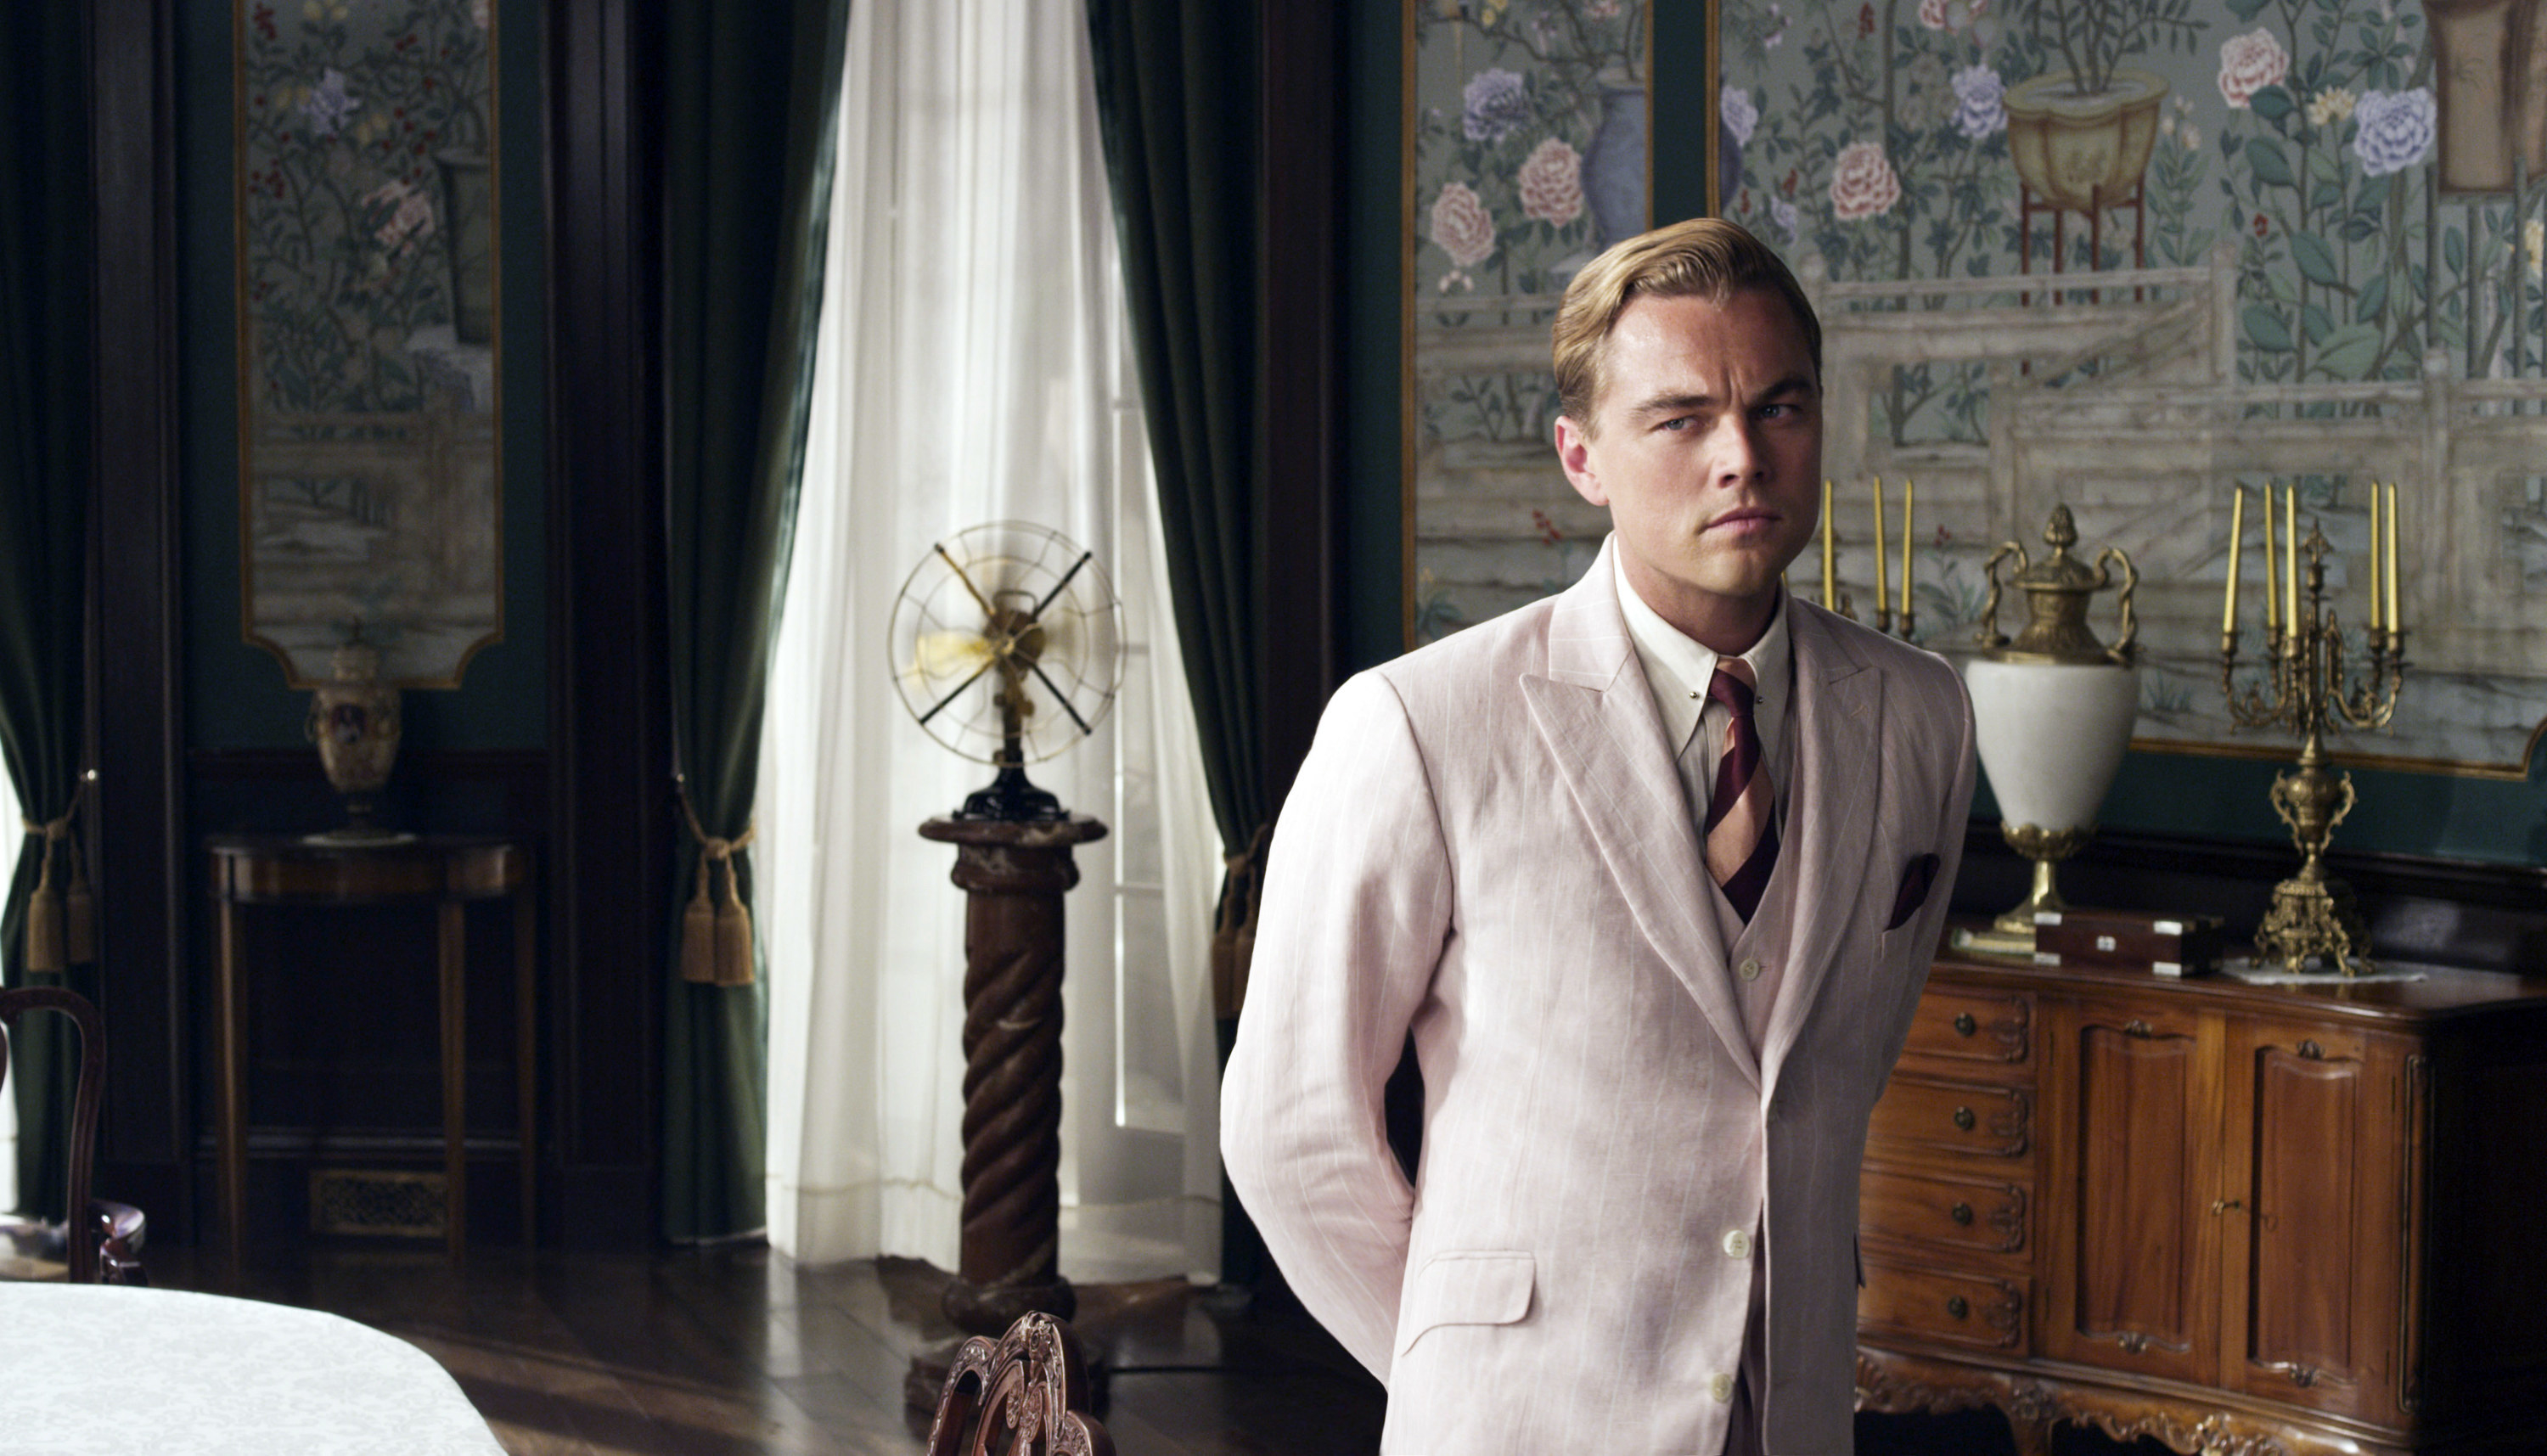 Leonardo DiCaprio stands in a pink suit in a room with beautiful wallpaper